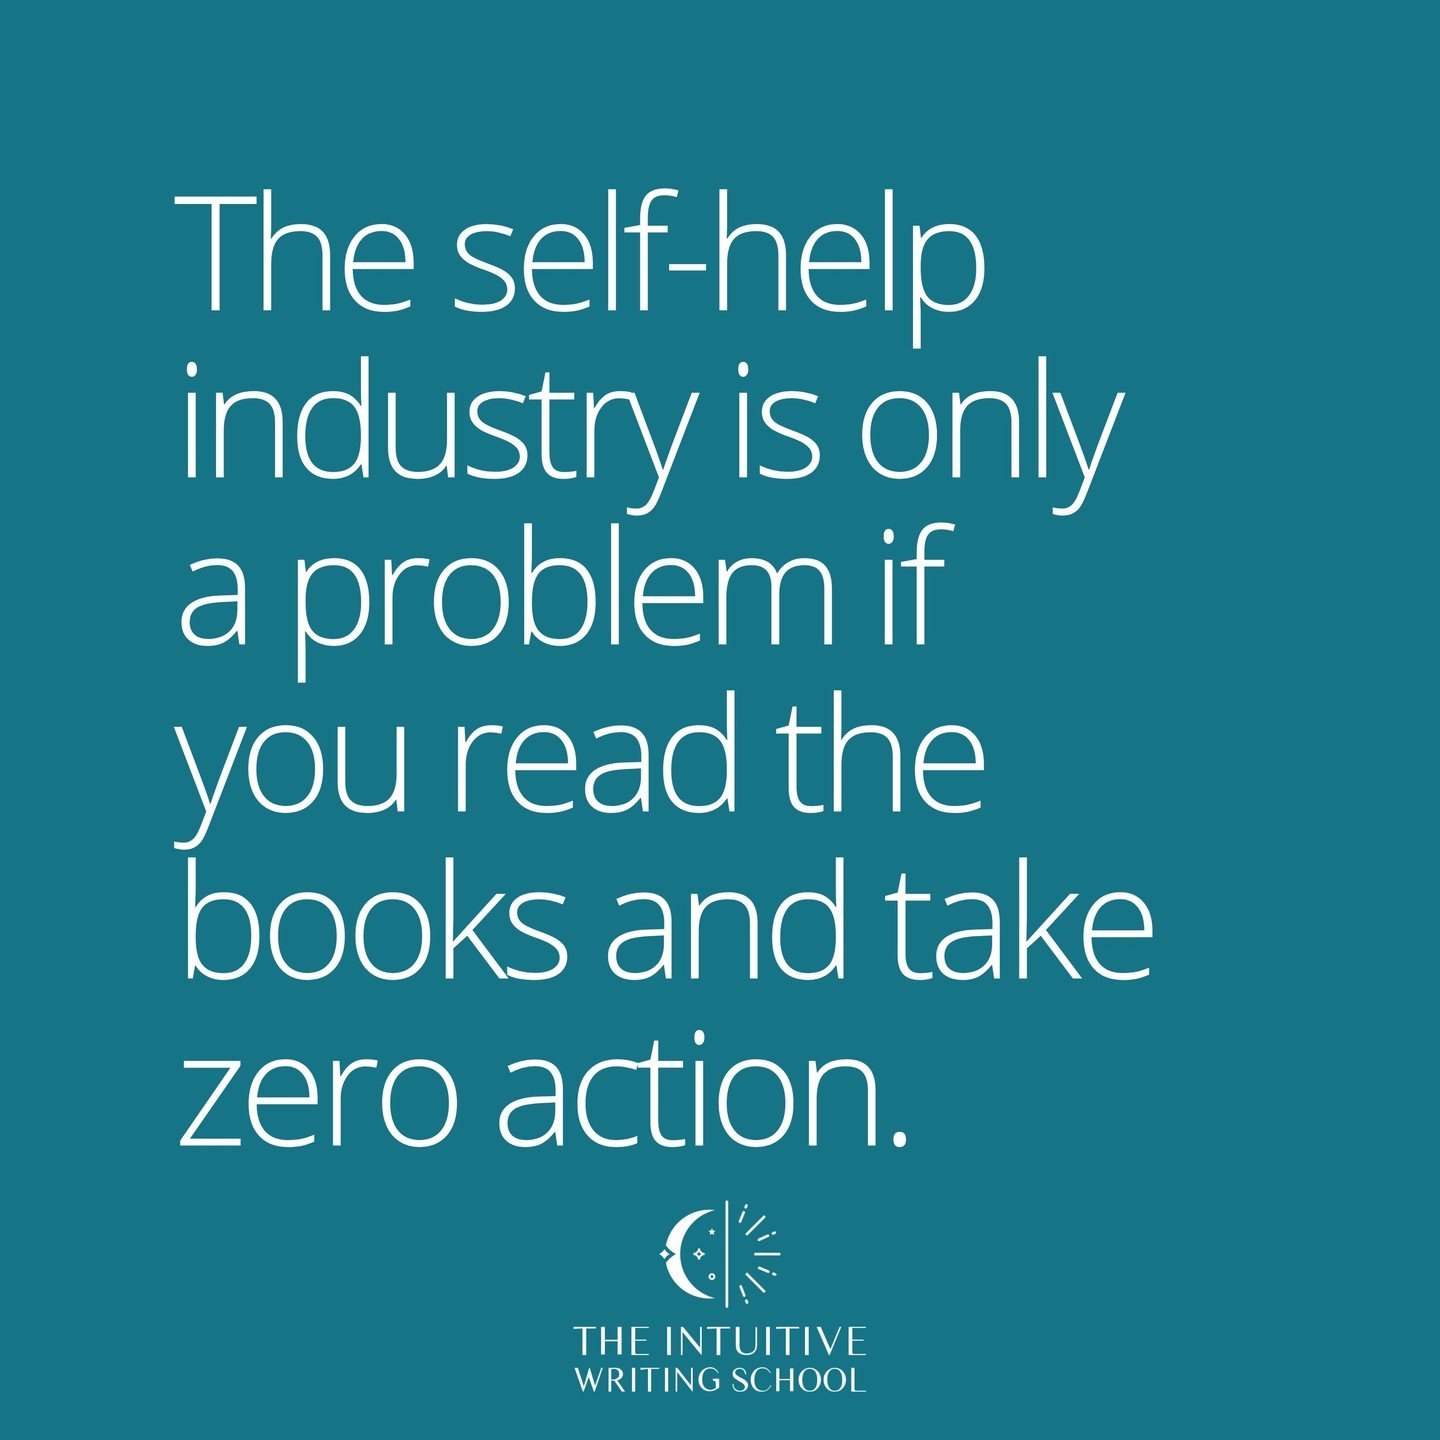 🙄 When people see you reading self help books sometimes you get some negative reactions.

They roll their eyes... &quot;ugh, not another self-help book.&quot;

These books sometimes get a bad rap.

I'm willing to bet the eye rollers are the ones who